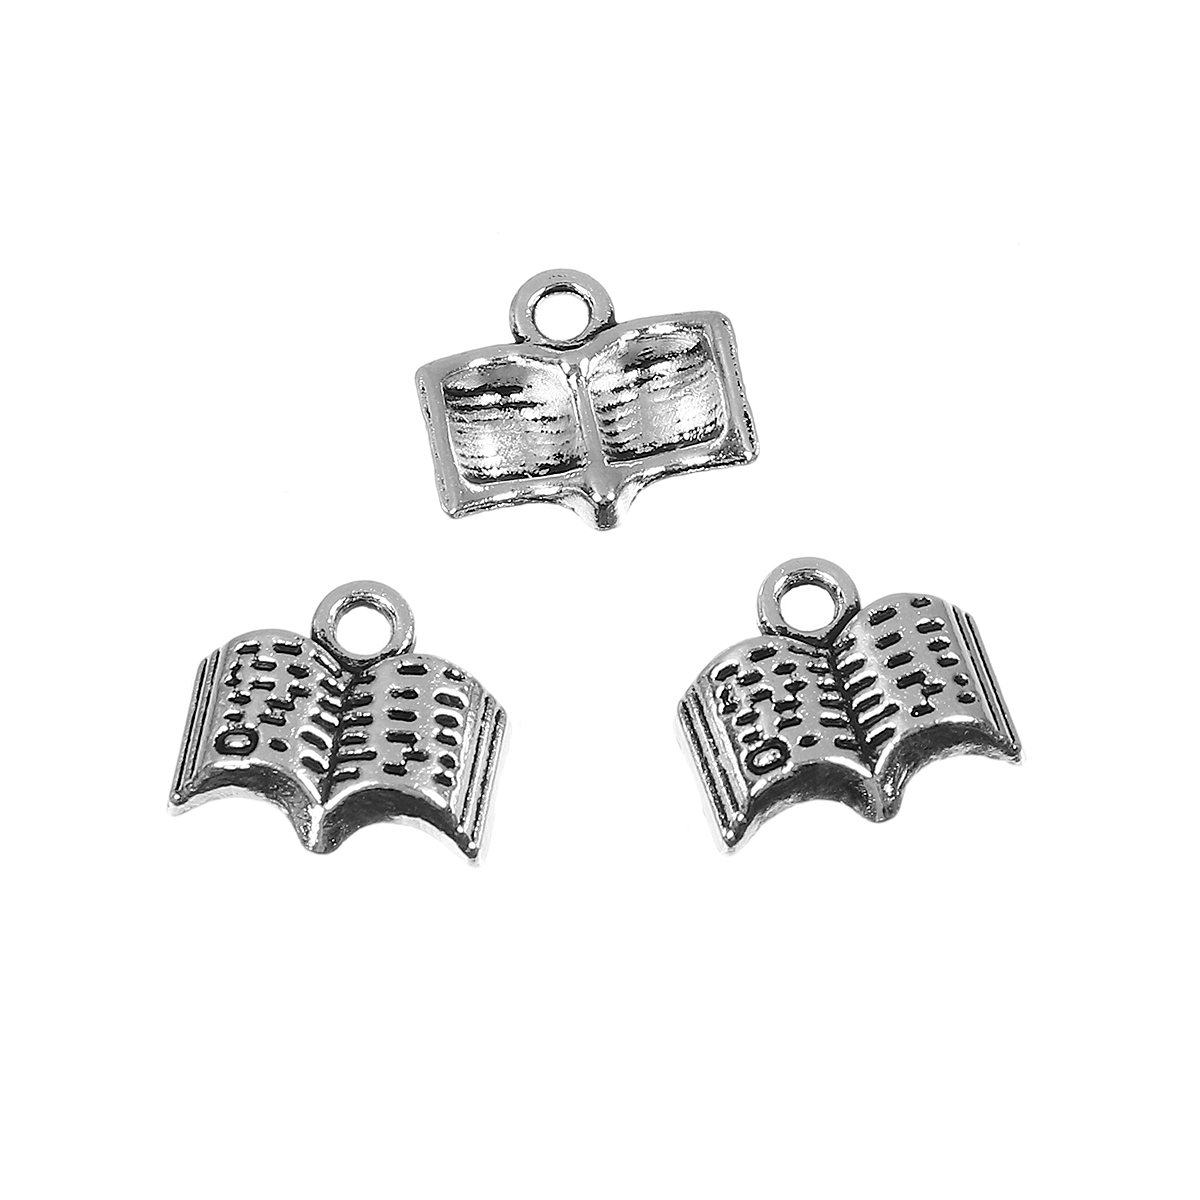 Picture of Zinc Based Alloy Charms Book Antique Silver Dot 12mm( 4/8") x 11mm( 3/8"), 50 PCs